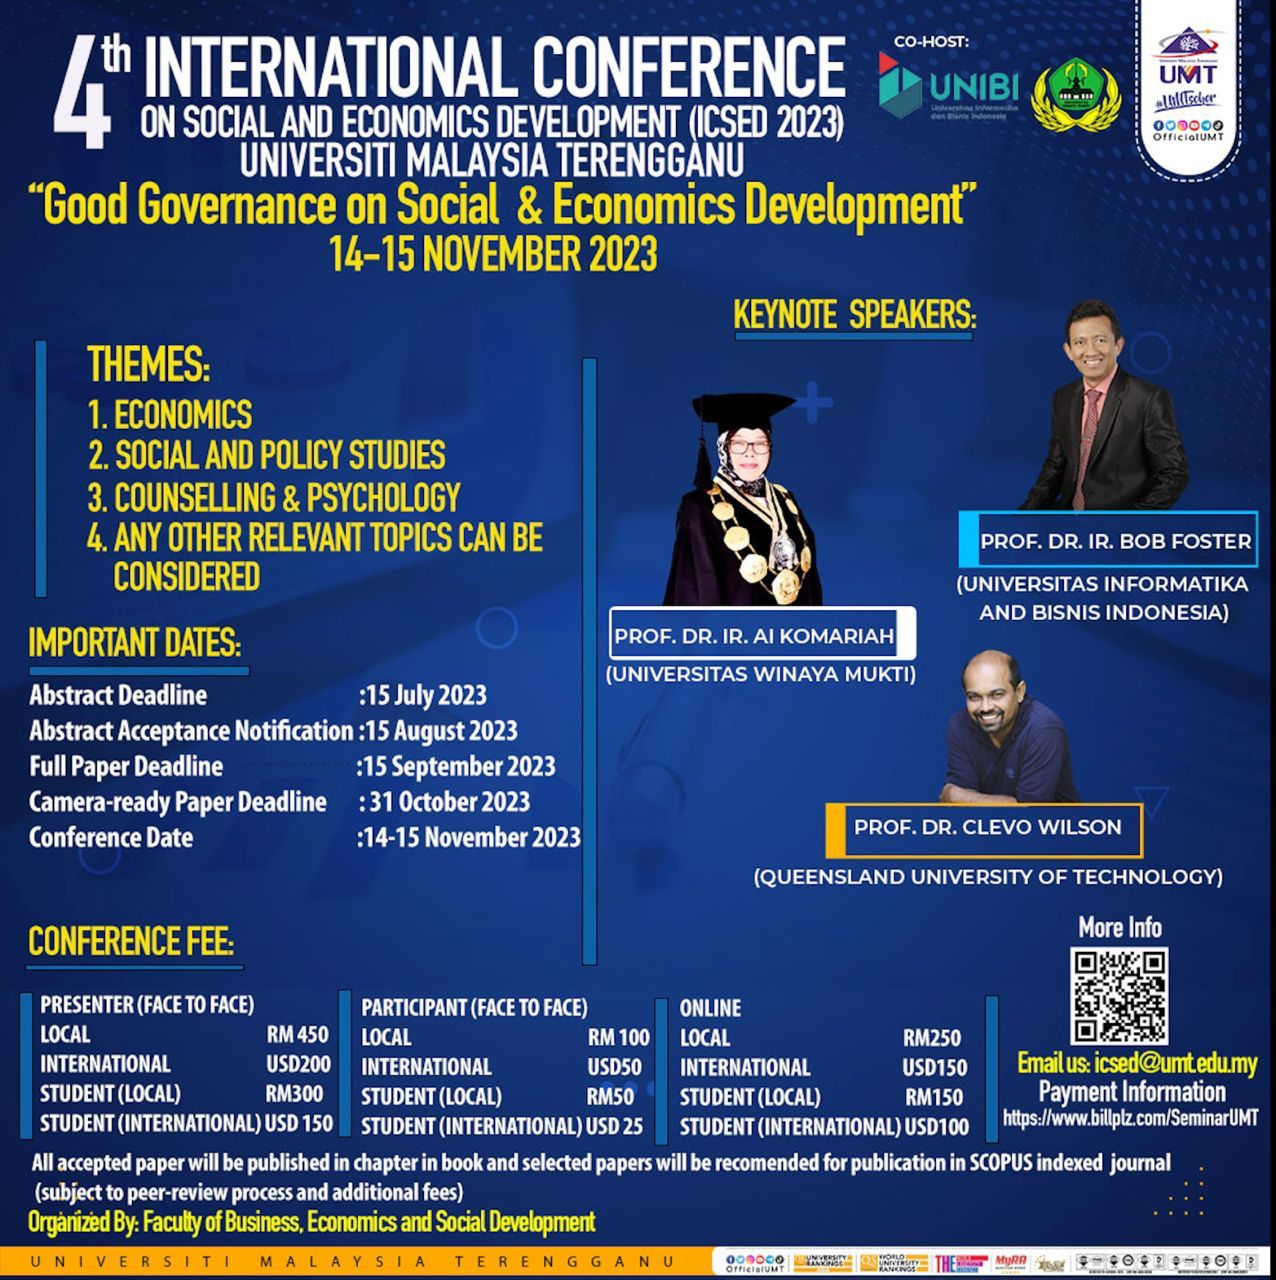 4th INTERNATIONAL CONFERENCE ON SOCIAL AND ECONOMIC DEVELOPMENT (ICSED 2023)